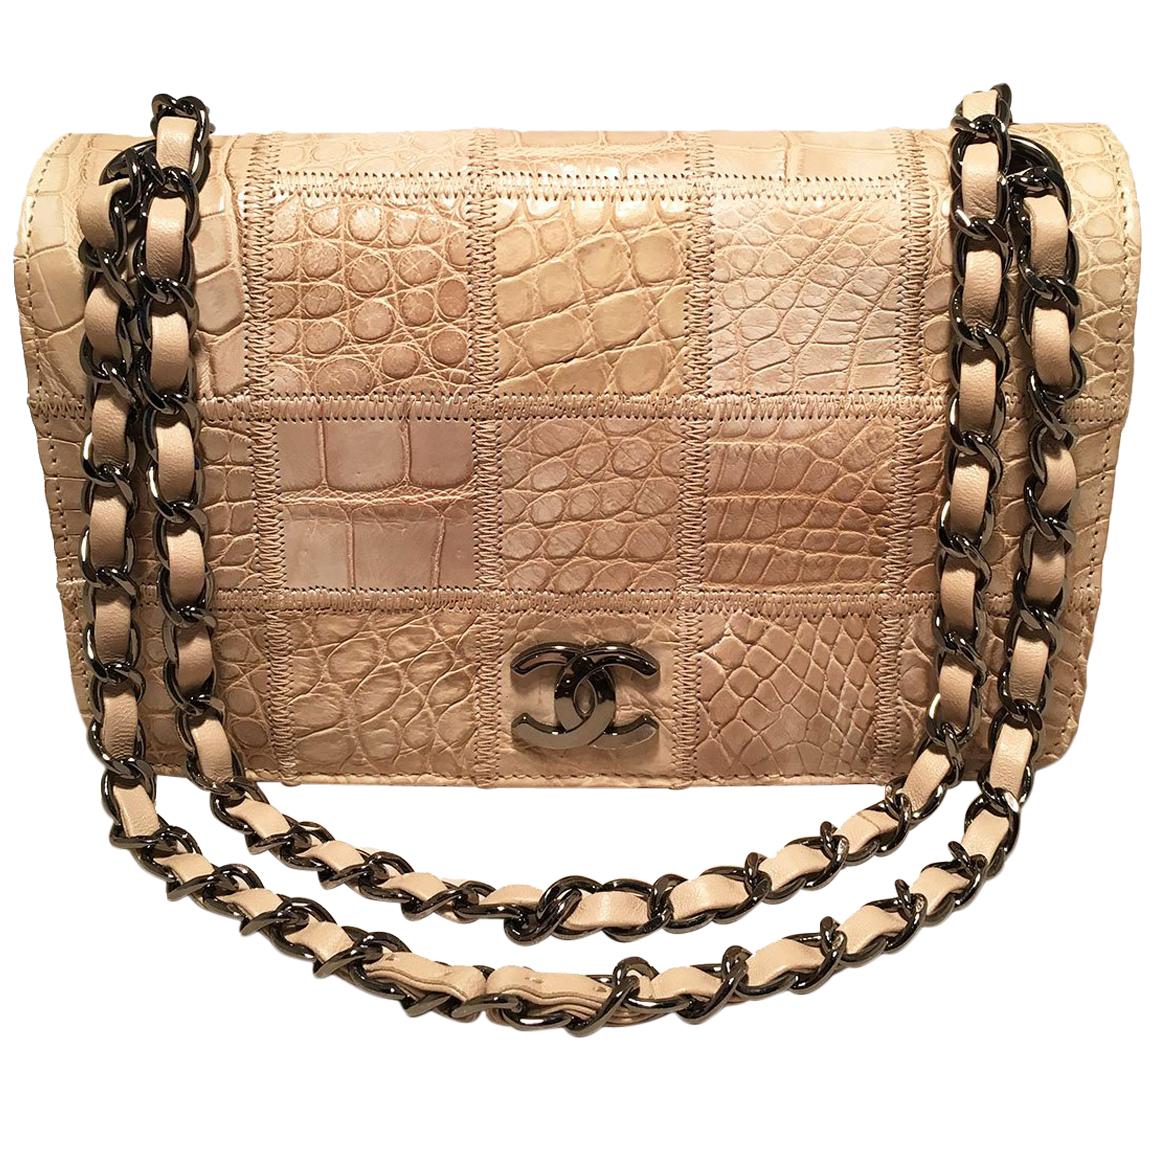 RARE Chanel Natural Beige Crocodile Quilted Classic Flap Shoulder Bag